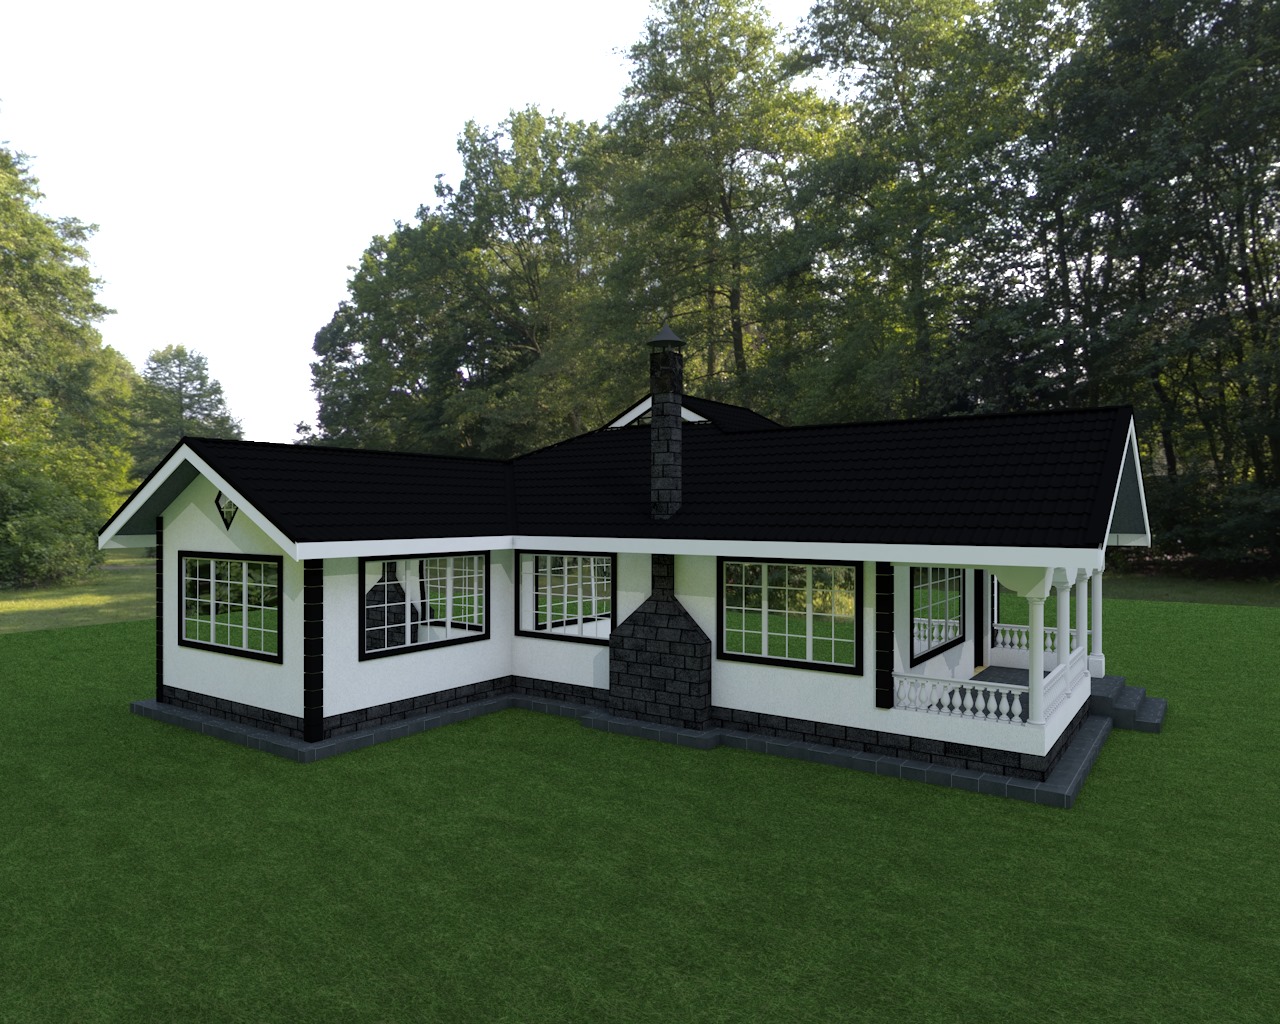 Two Bedroom Bungalow House Plan